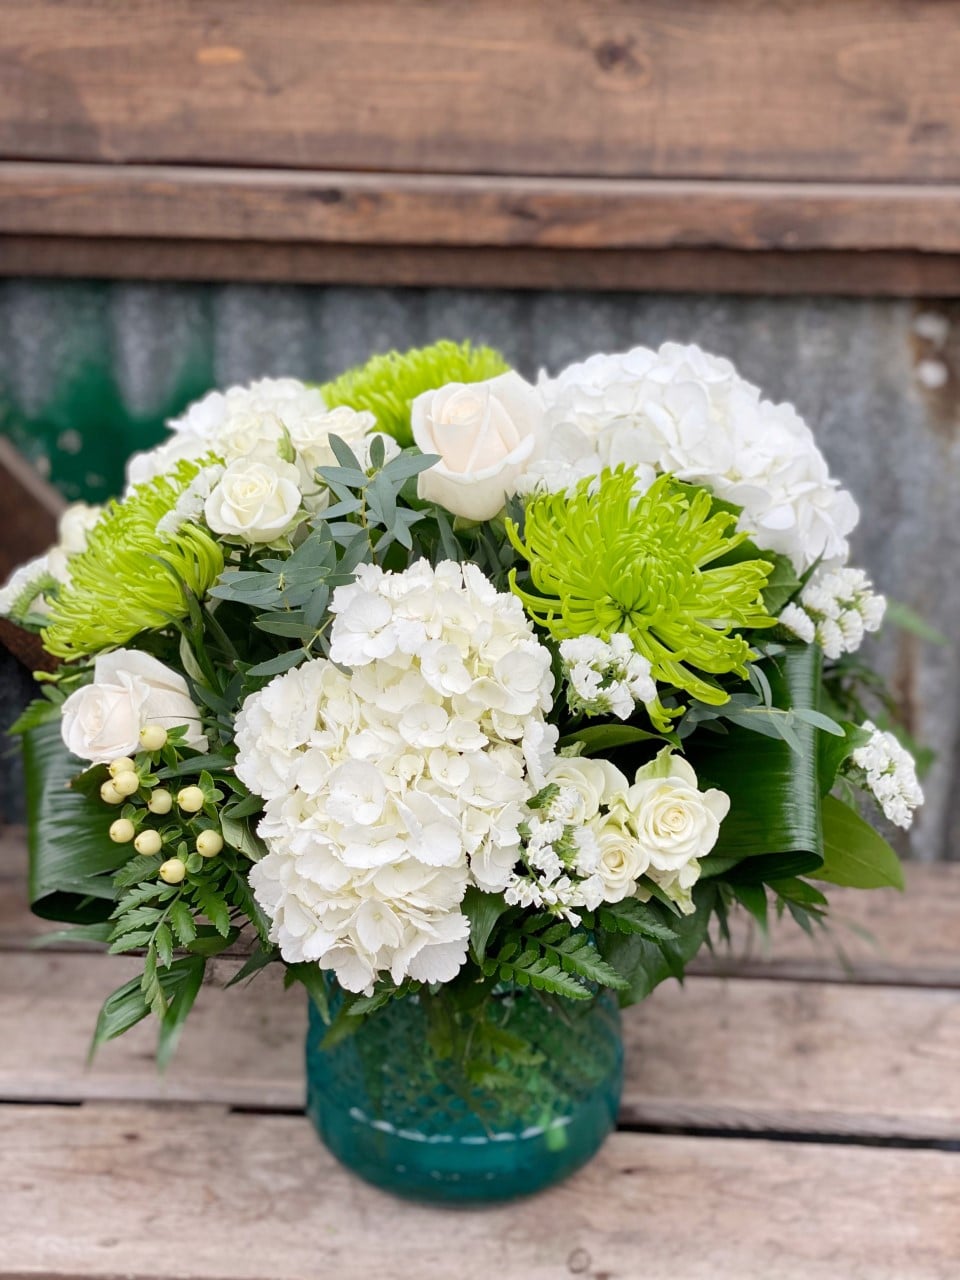 The Watering Can | A large green and white bouquet in a blue textured glass vase.